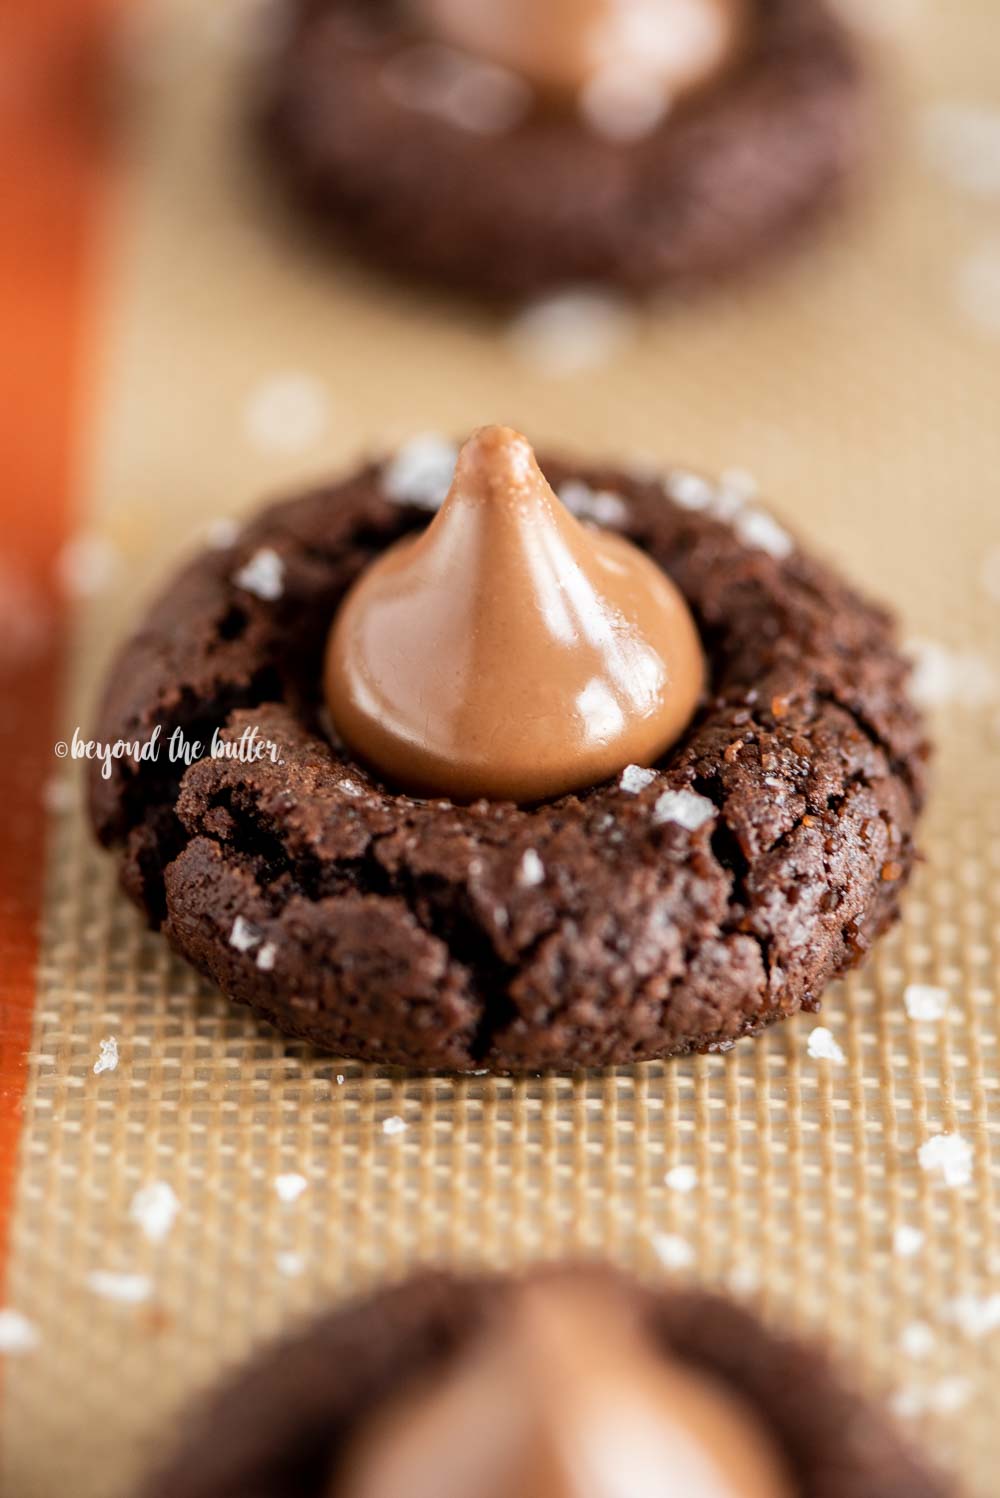 Angled image of Chocolate Caramel Blossoms on cookie sheet | All Images © Beyond the Butter, LLC